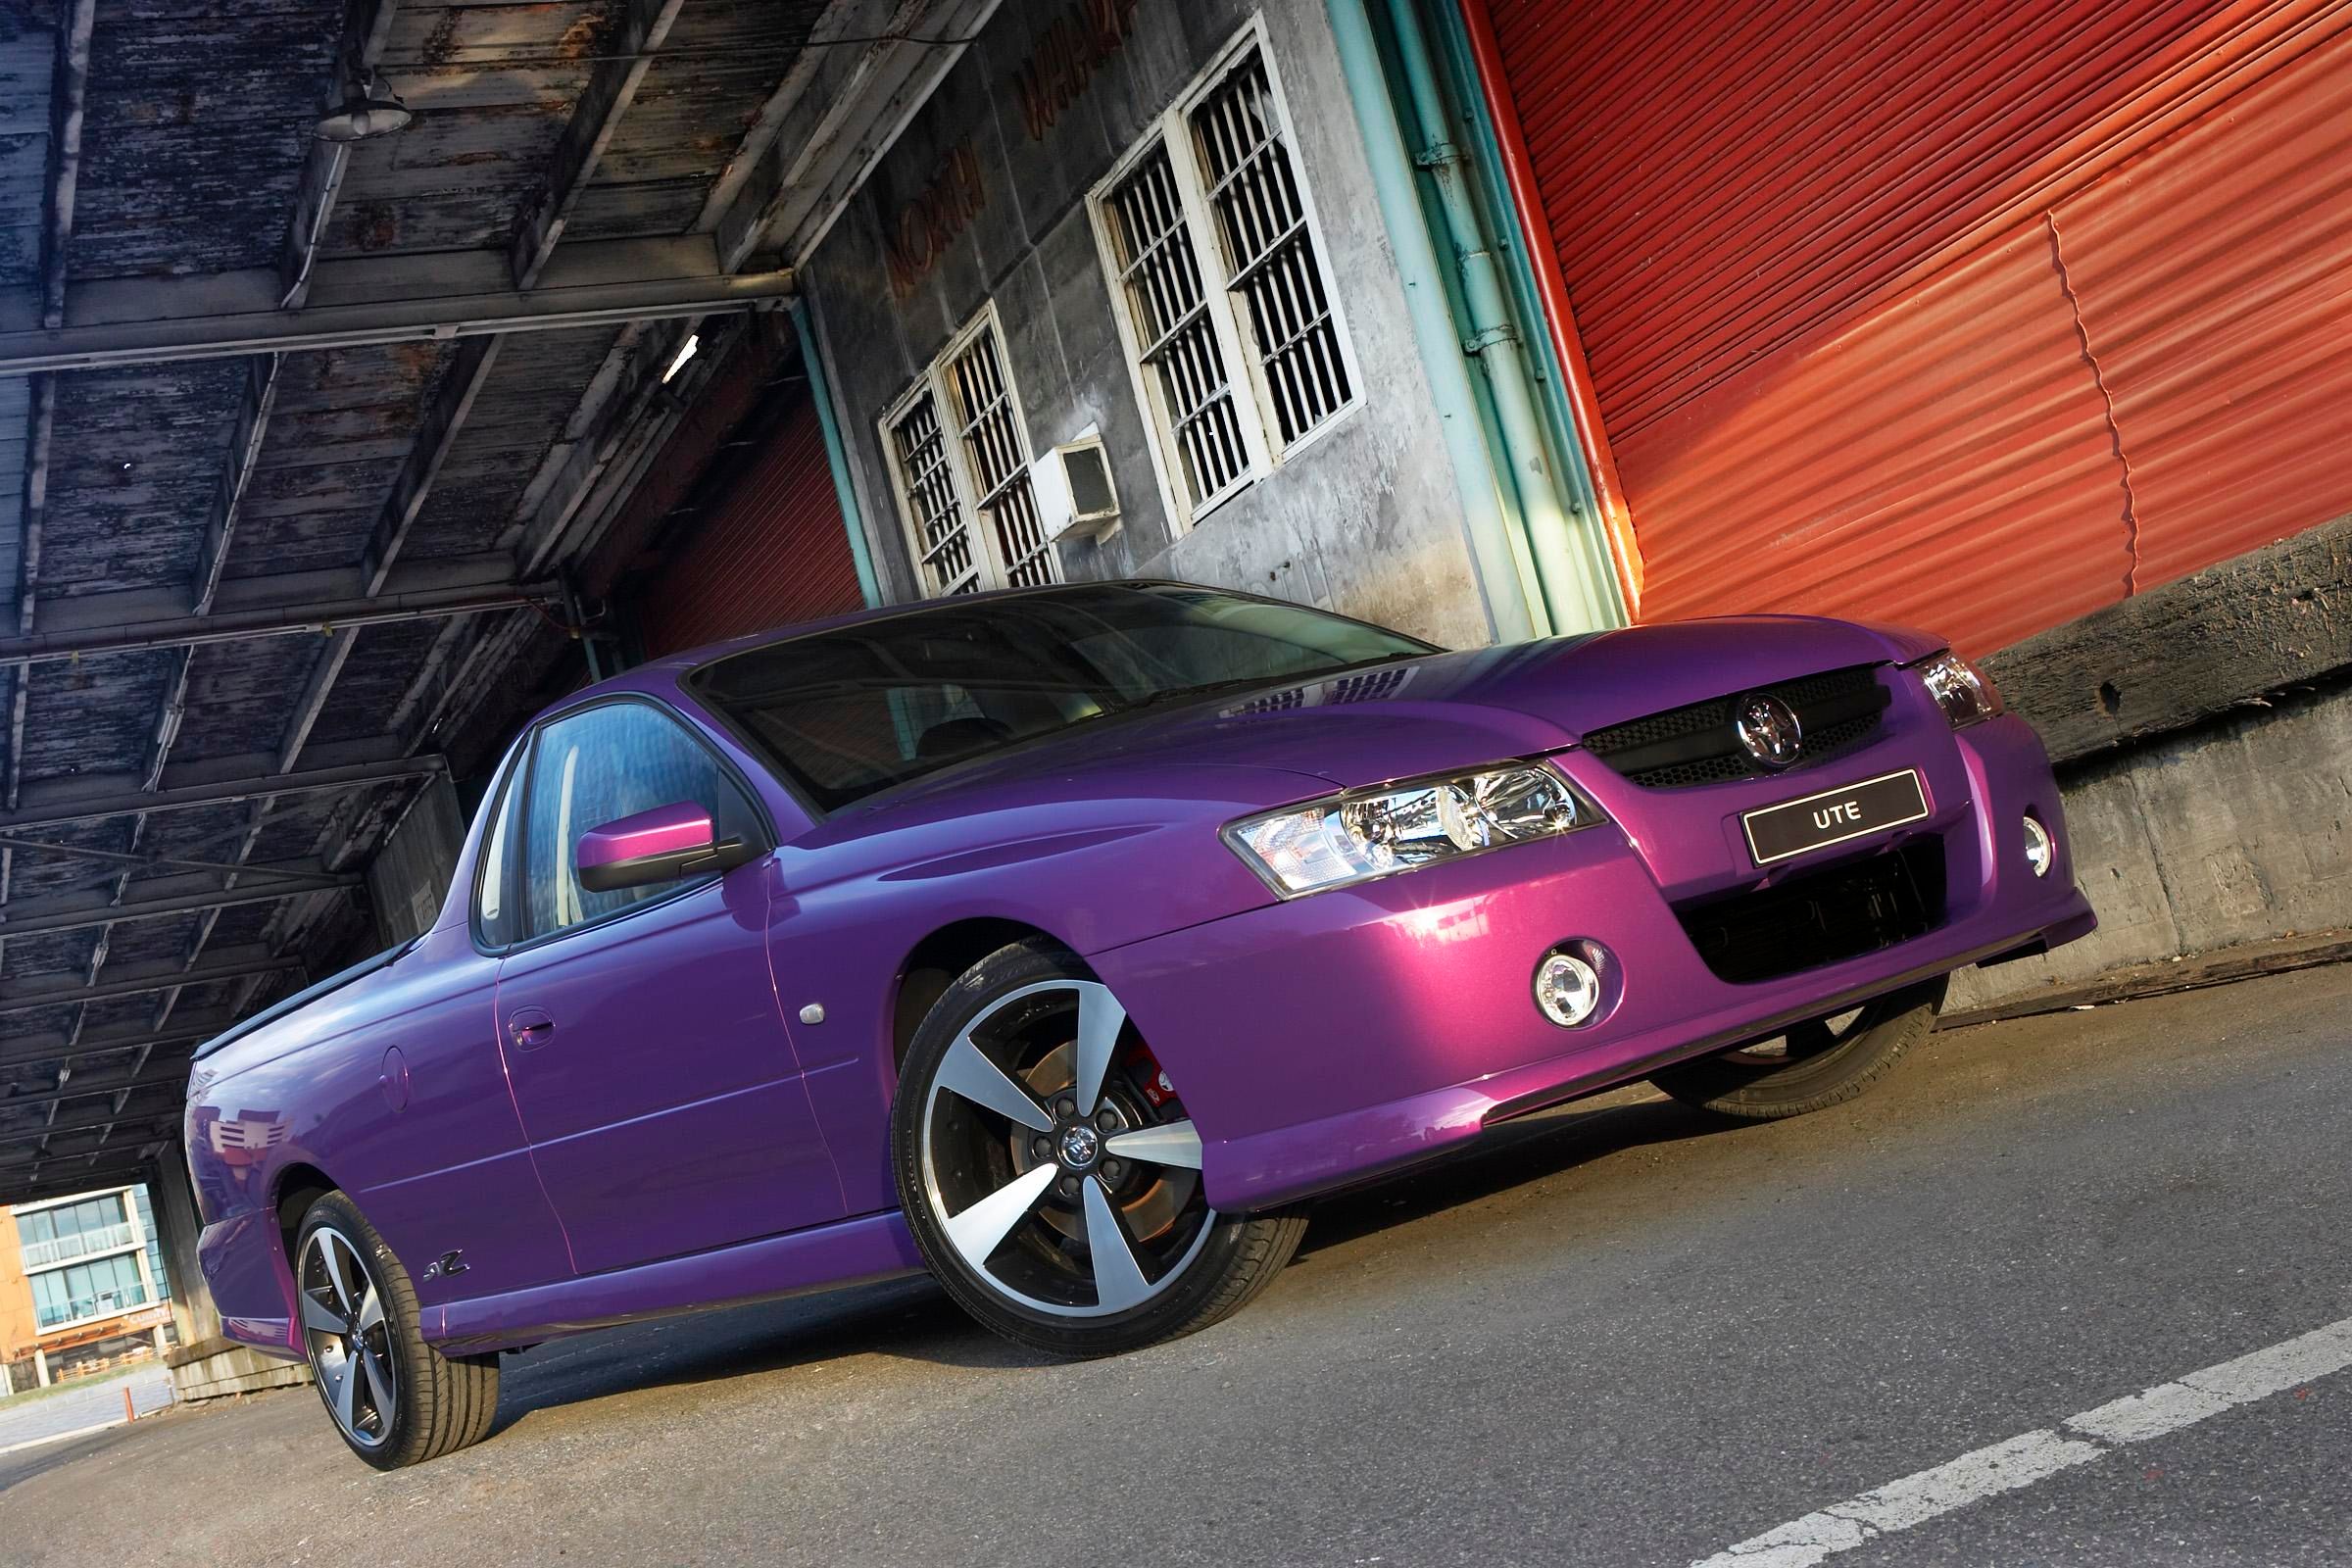 2007 Holden Commodore SVZ Ute And Wagon